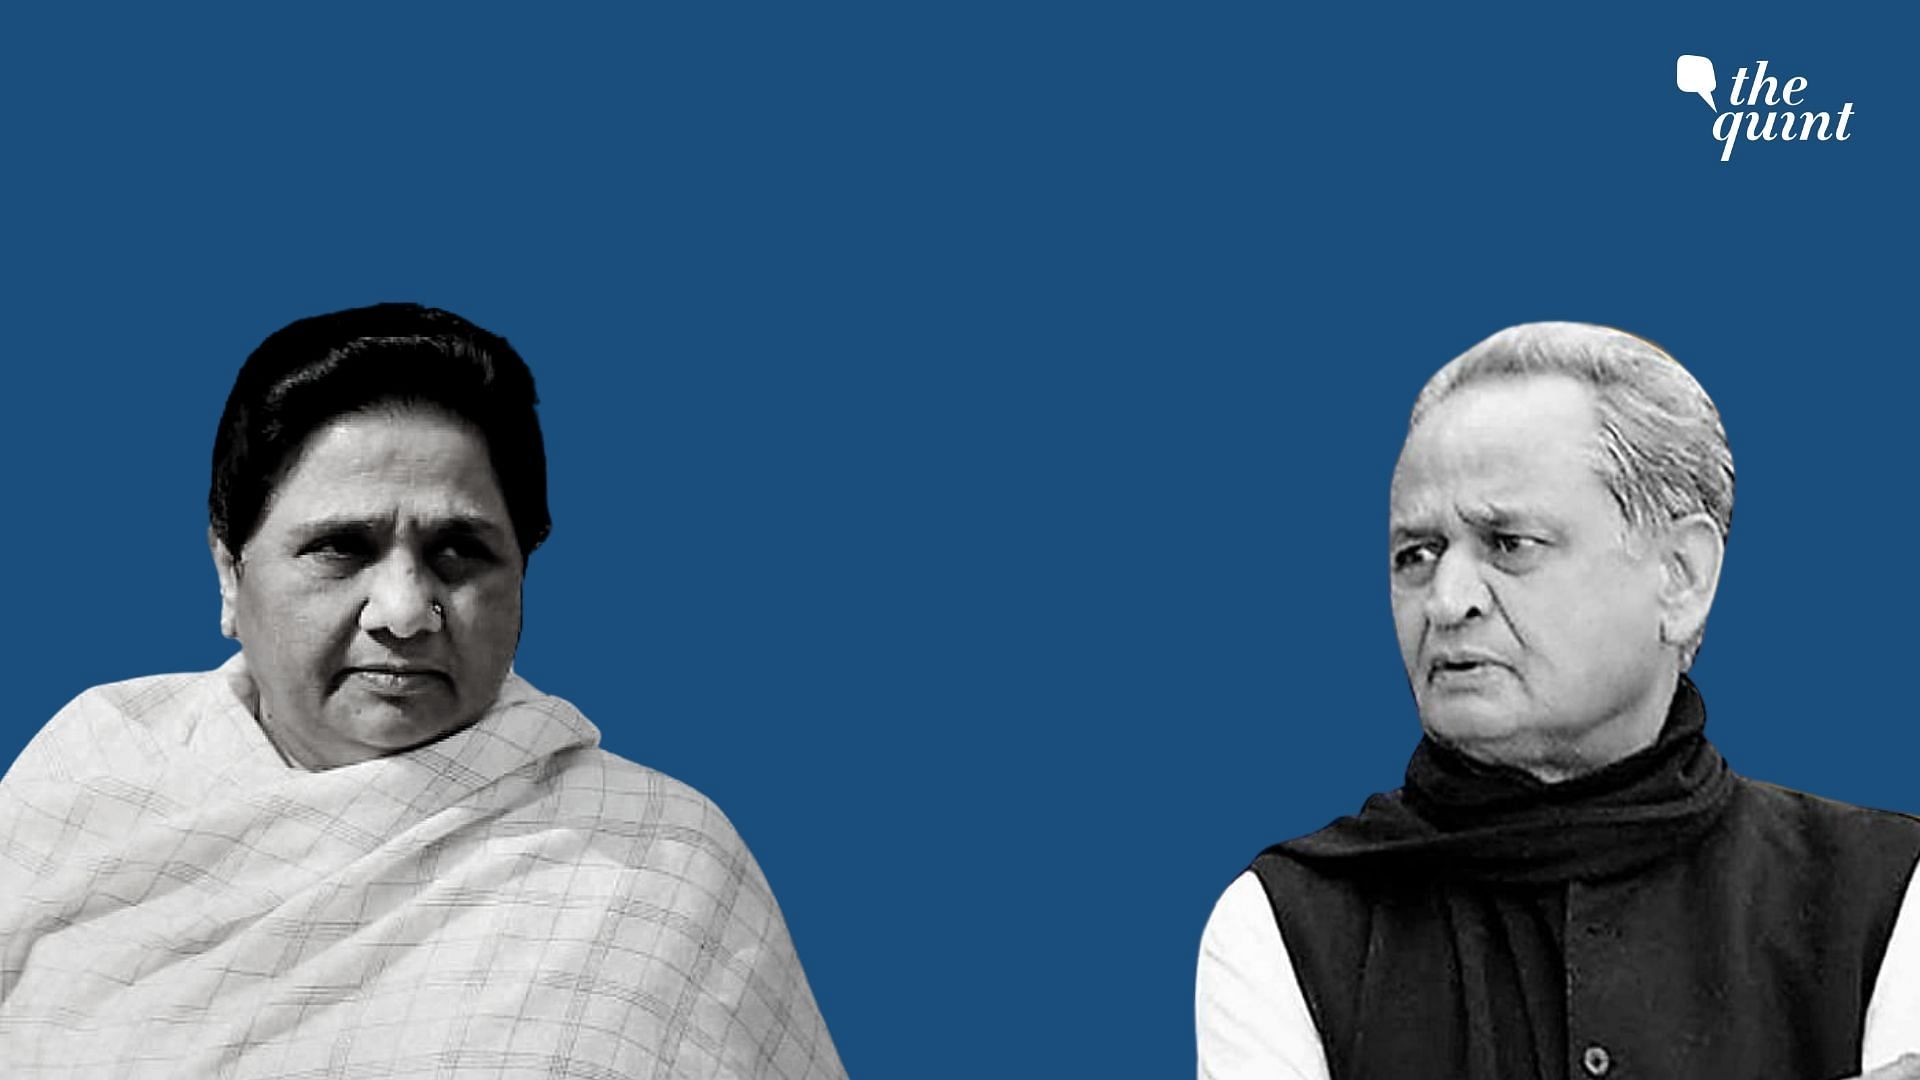 Bahujan Samaj Party (BSP) supremo Mayawati on Tuesday, 28 July, hit out at Rajasthan CM Ashok Gehlot for merging six BSP MLAs of the state wth the Congress and warned that she will move the Supreme Court in the matter if need be.